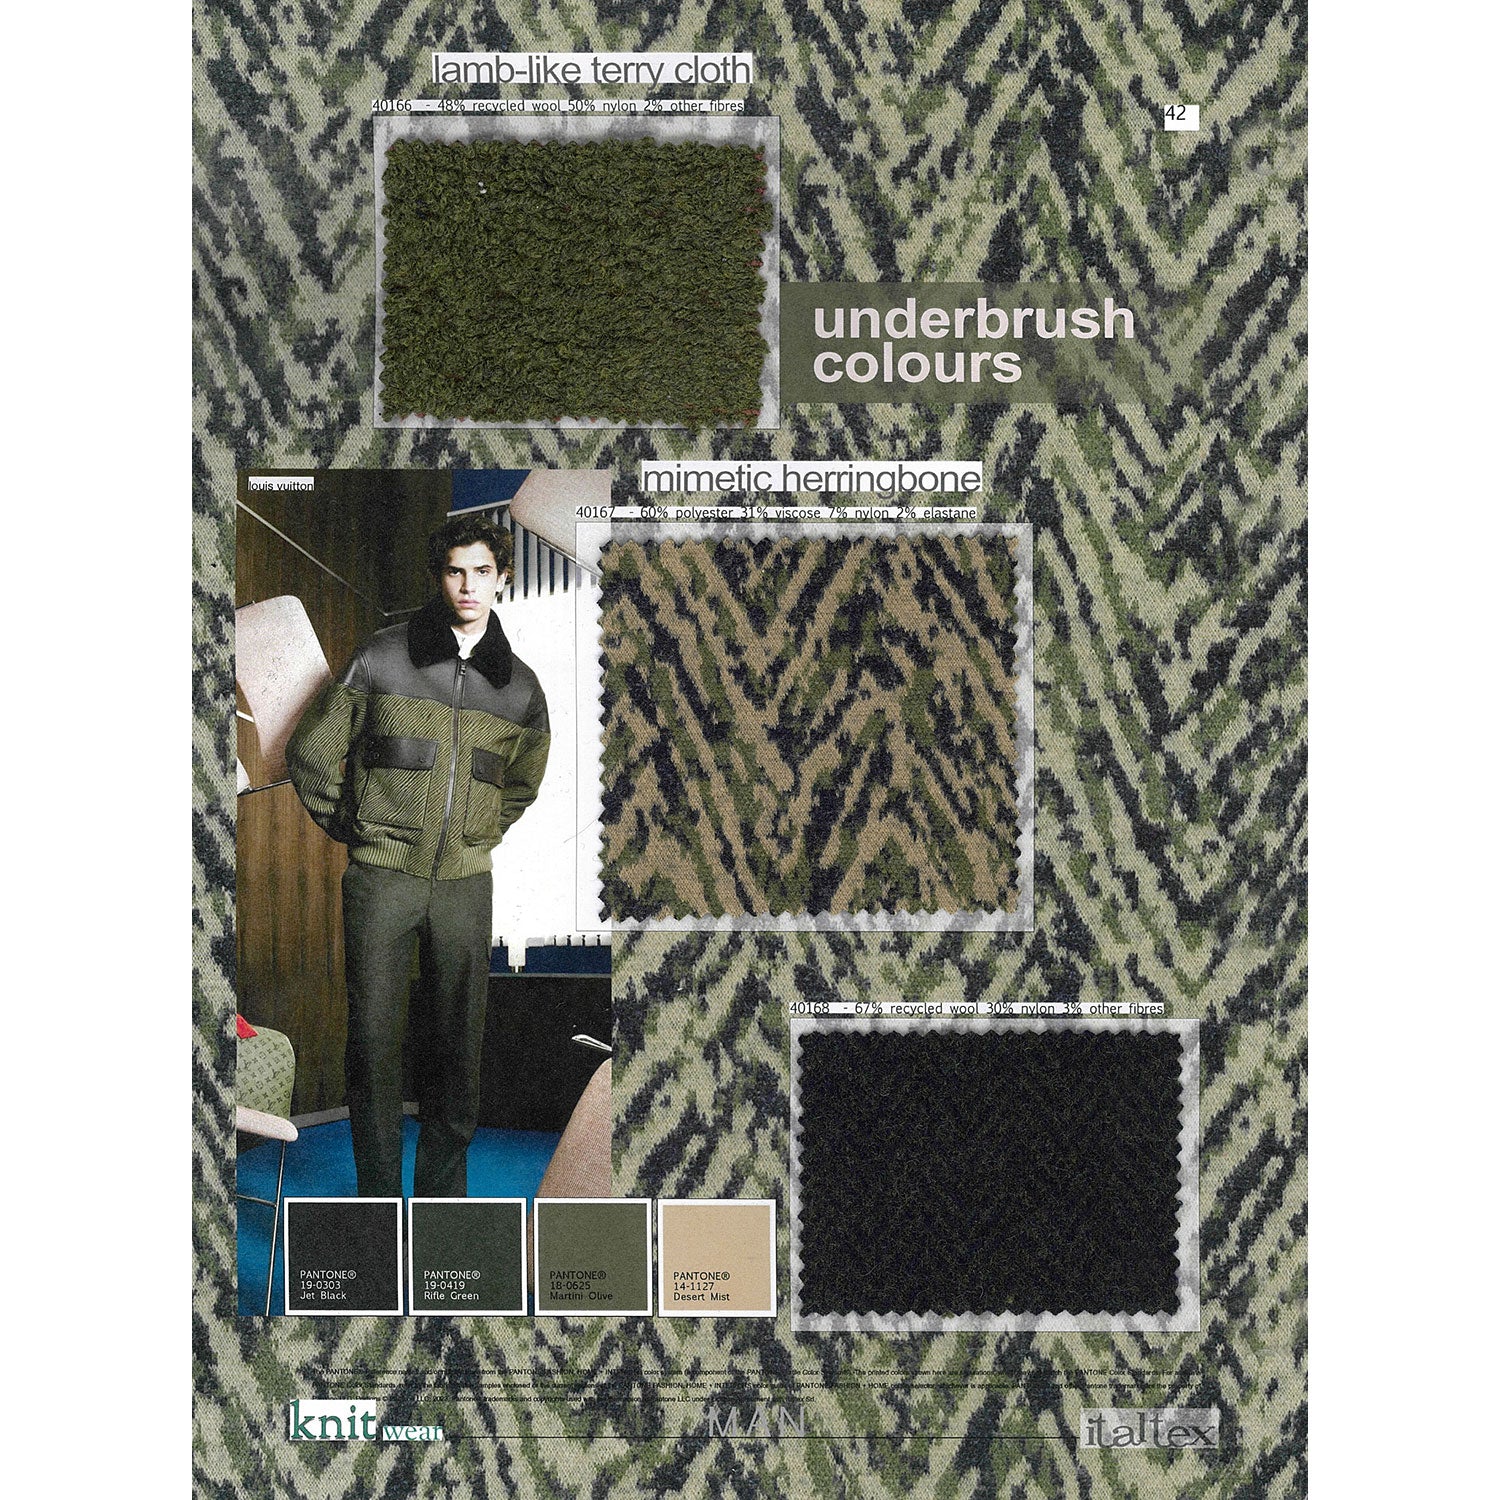 Three knit fabric swatches for men's wear in underbush colors for jackets or sweaters. One green lamb-like terry cloth in recycled wool. One jacquard camouflage pattern. One compact herringbone pattern knit fabric in recycled wool for jackets or  trousers